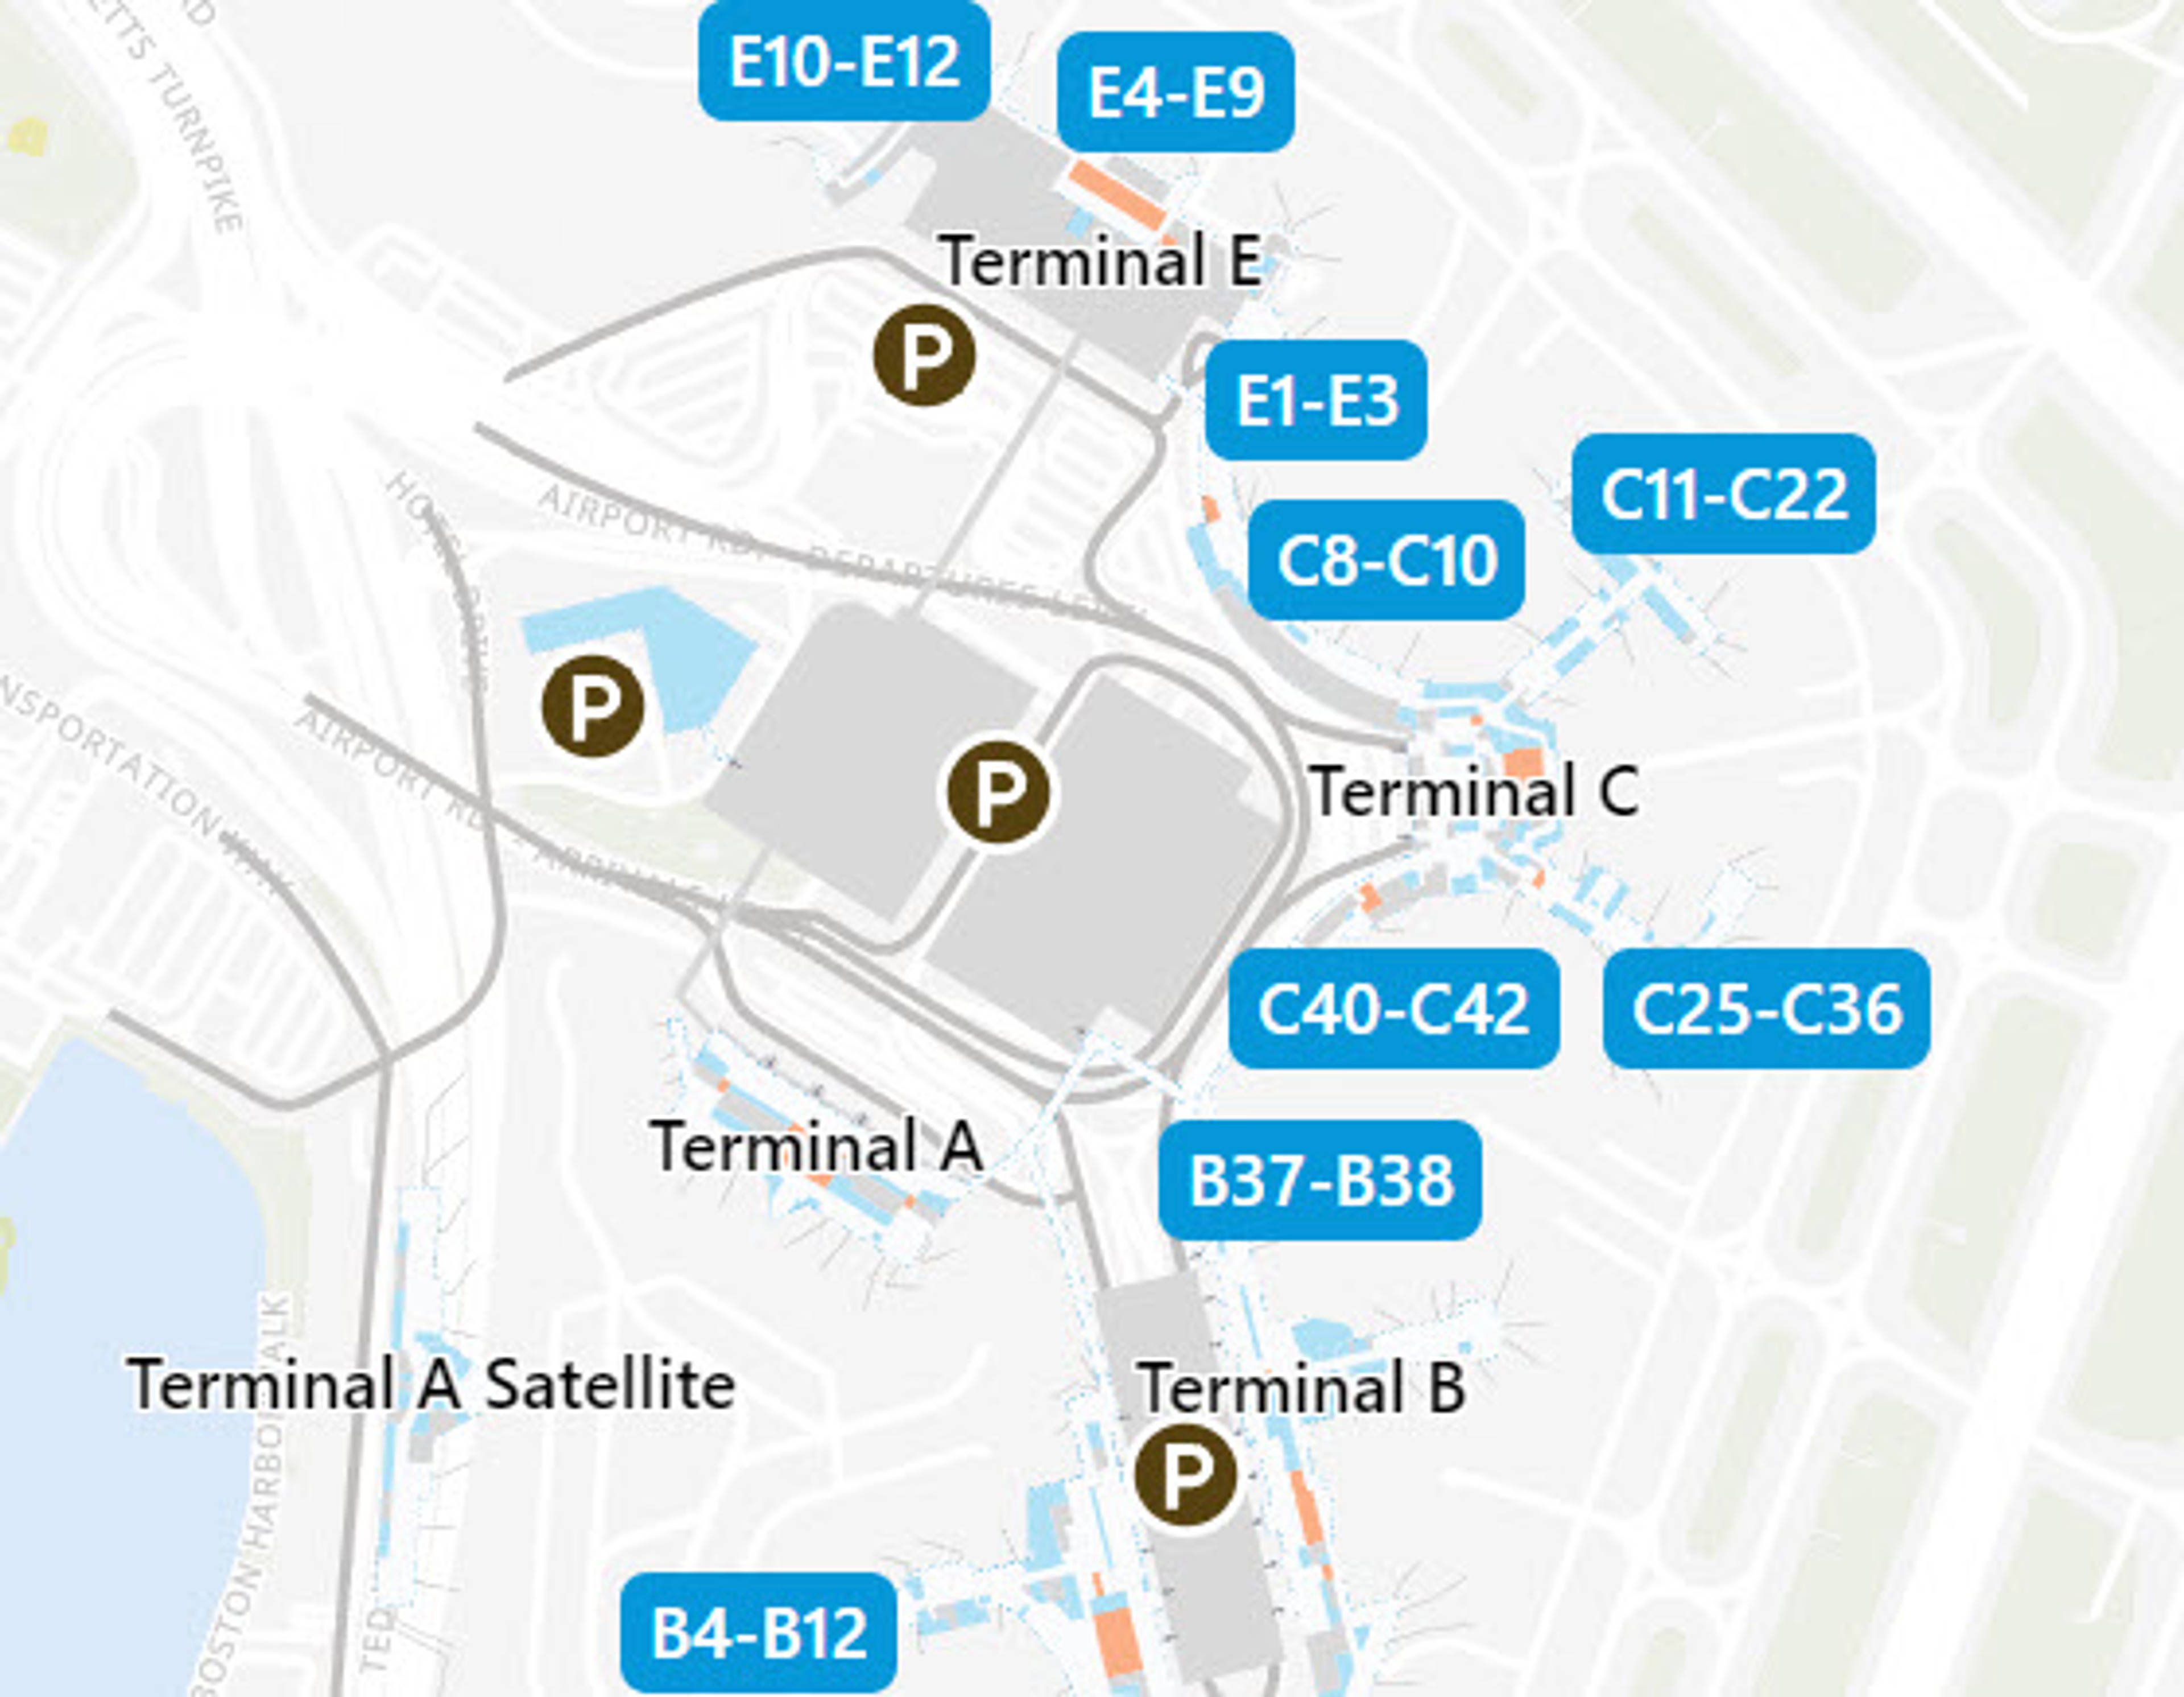 BOS Airport Overview Map